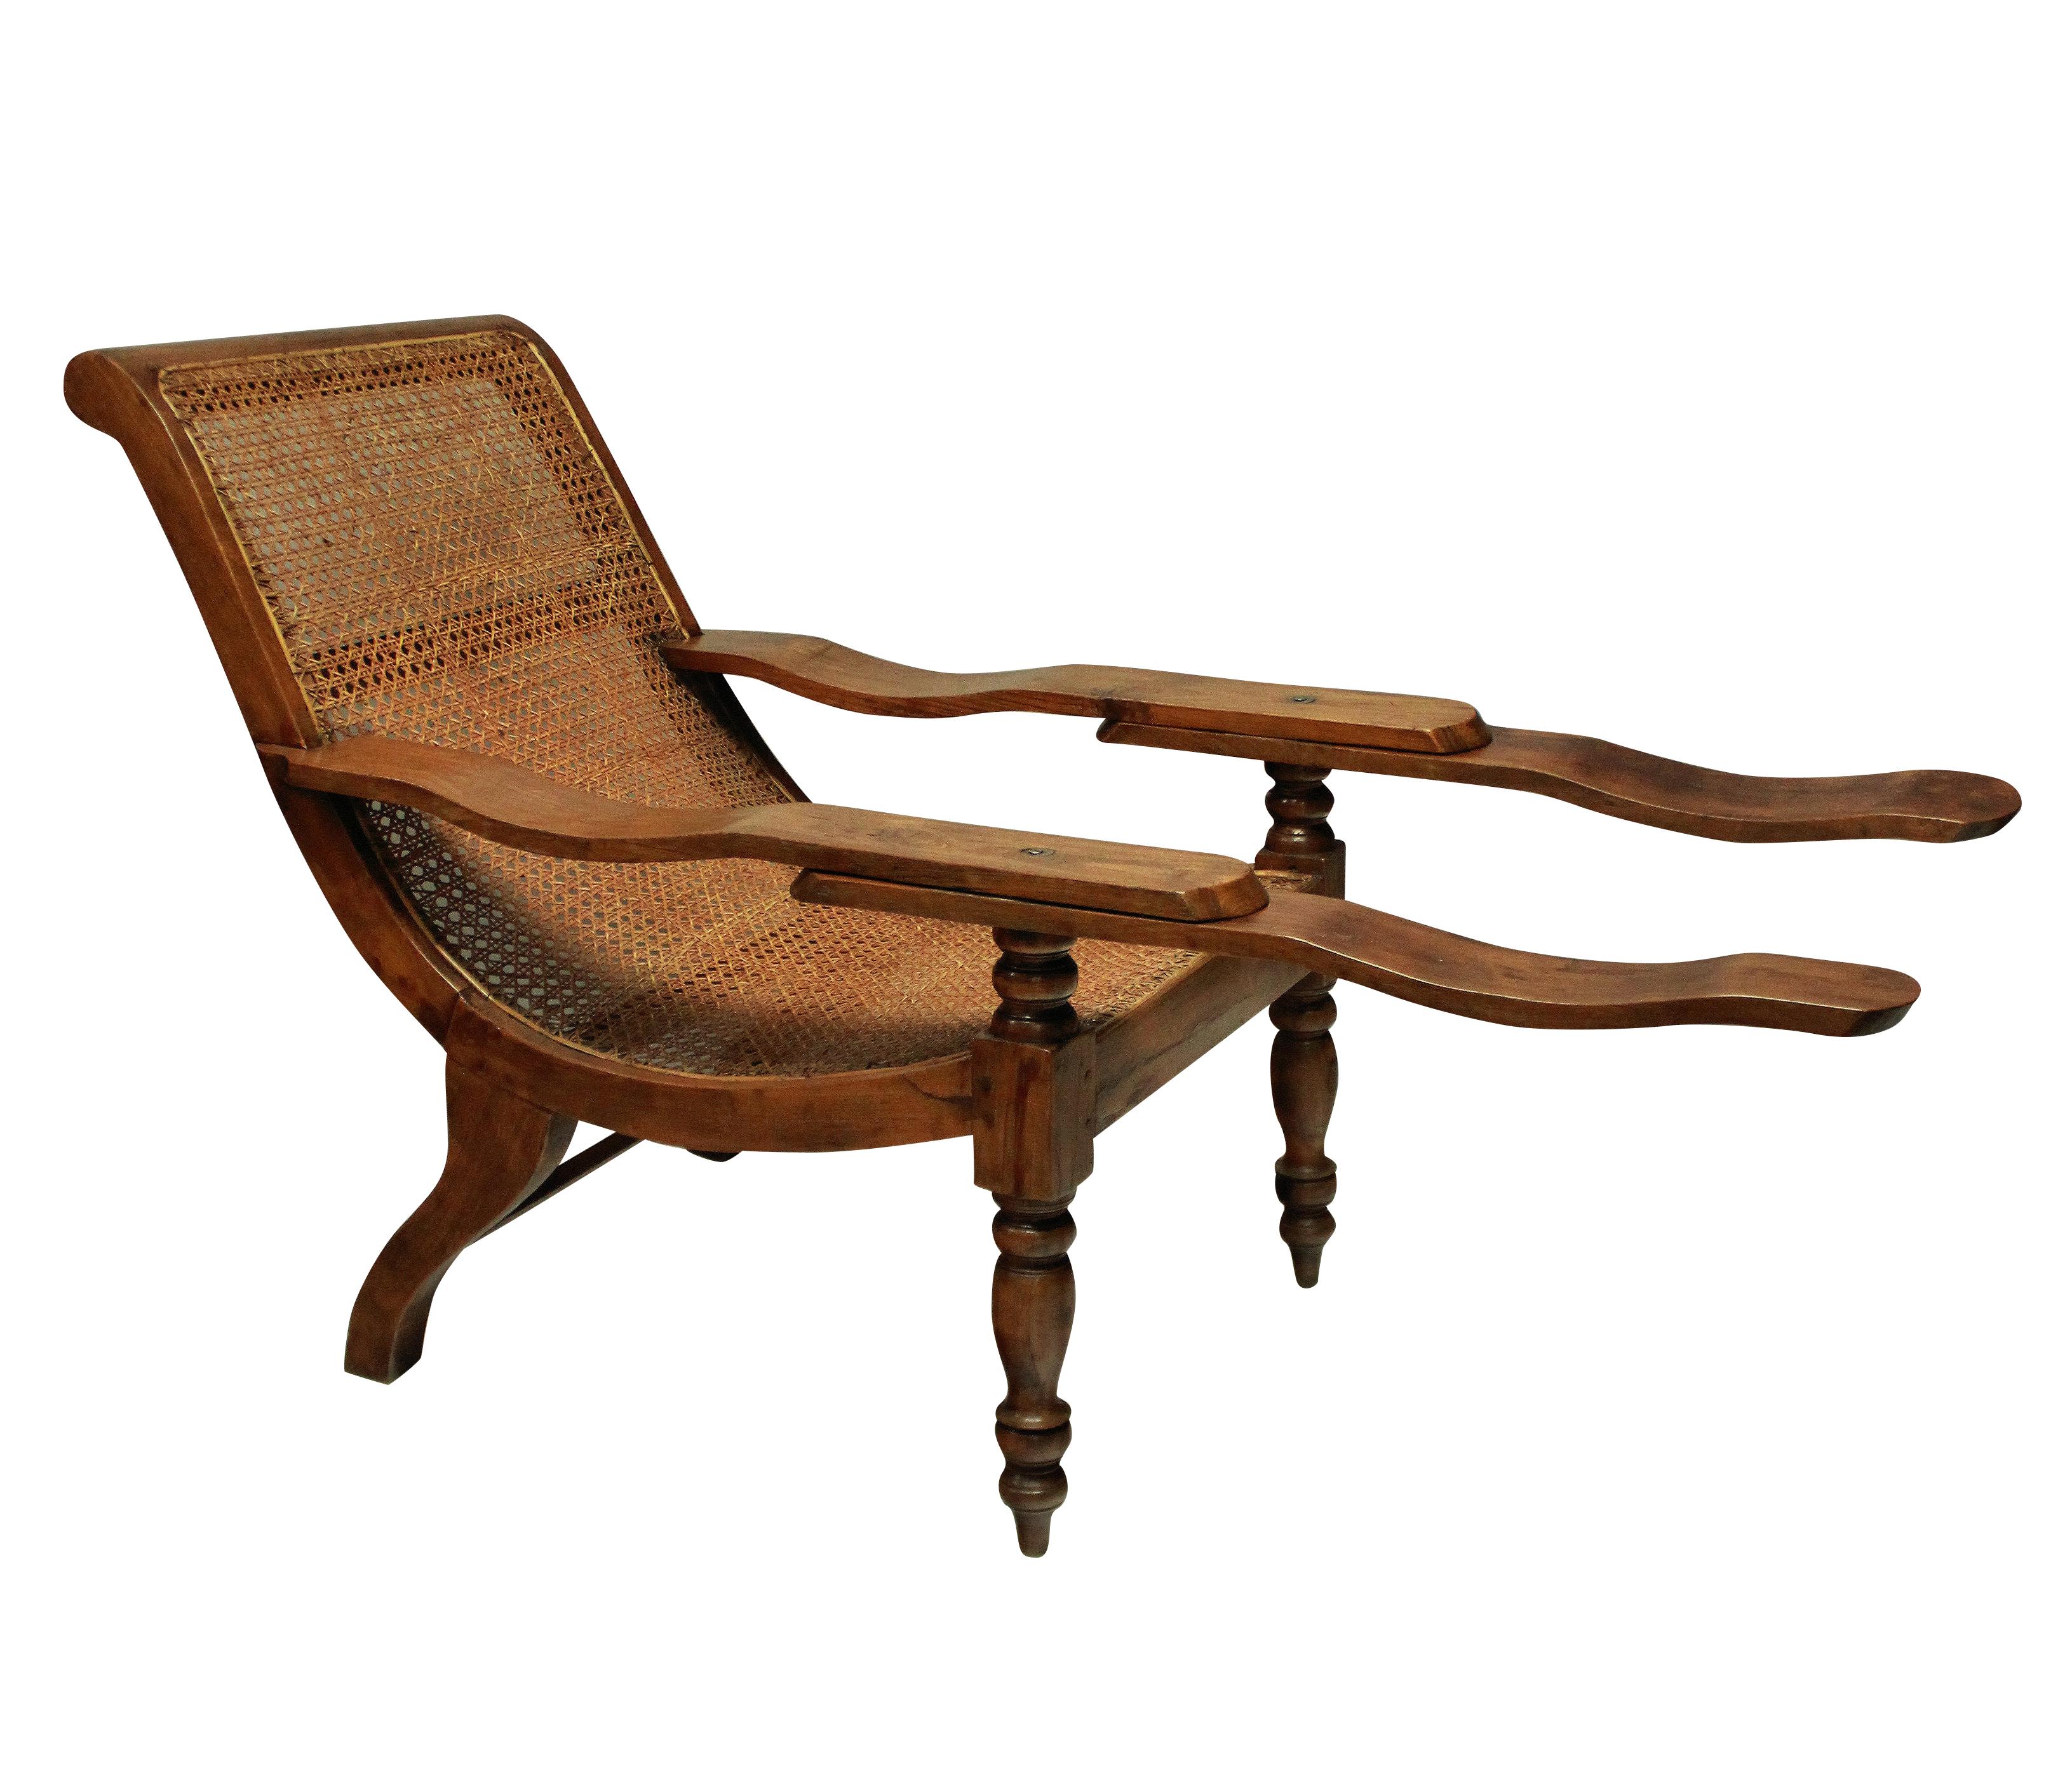 Indian Large 19th Century Solid Teak Colonial Plantation Chair